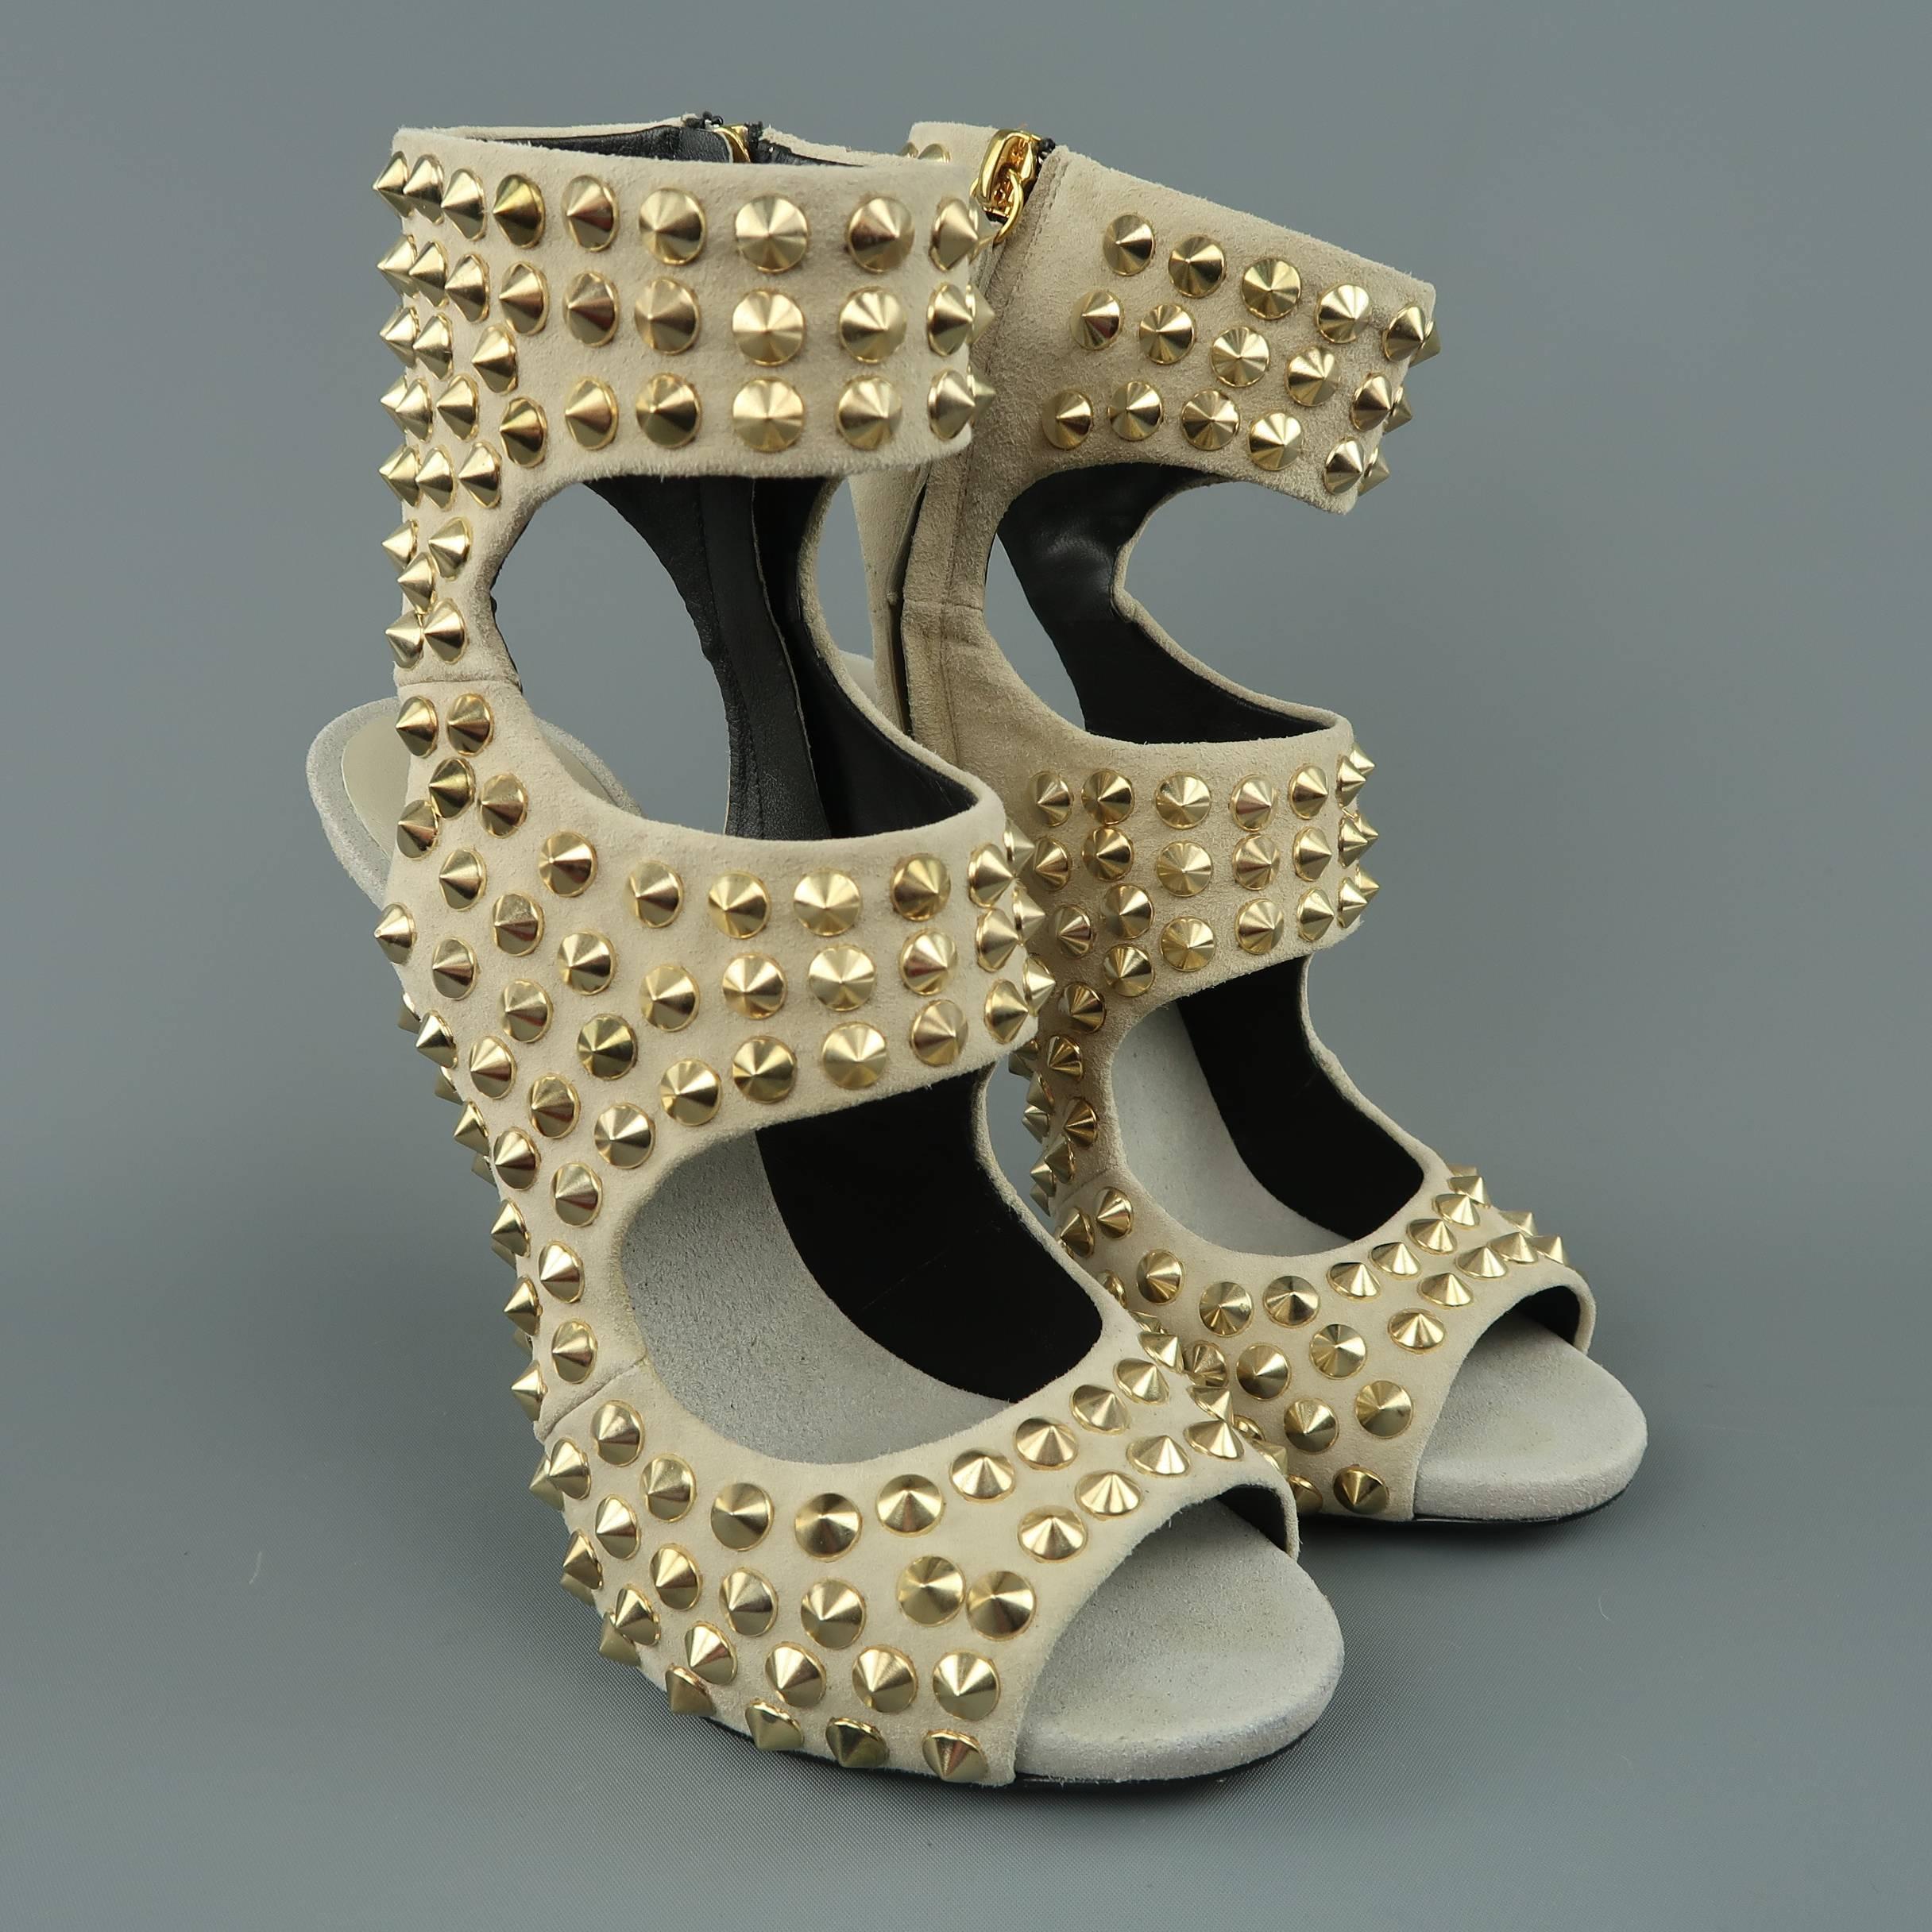 GIUSEPPE ZANOTTI sandals come in beige suede with gold tone cone spike studs throughout, thick straps, peep toe, open back, and underslung heel. Wear throughout. Made in Italy.
 
Good Pre-Owned Condition.
Marked: IT 39
 
Heel: 5.5 in.
